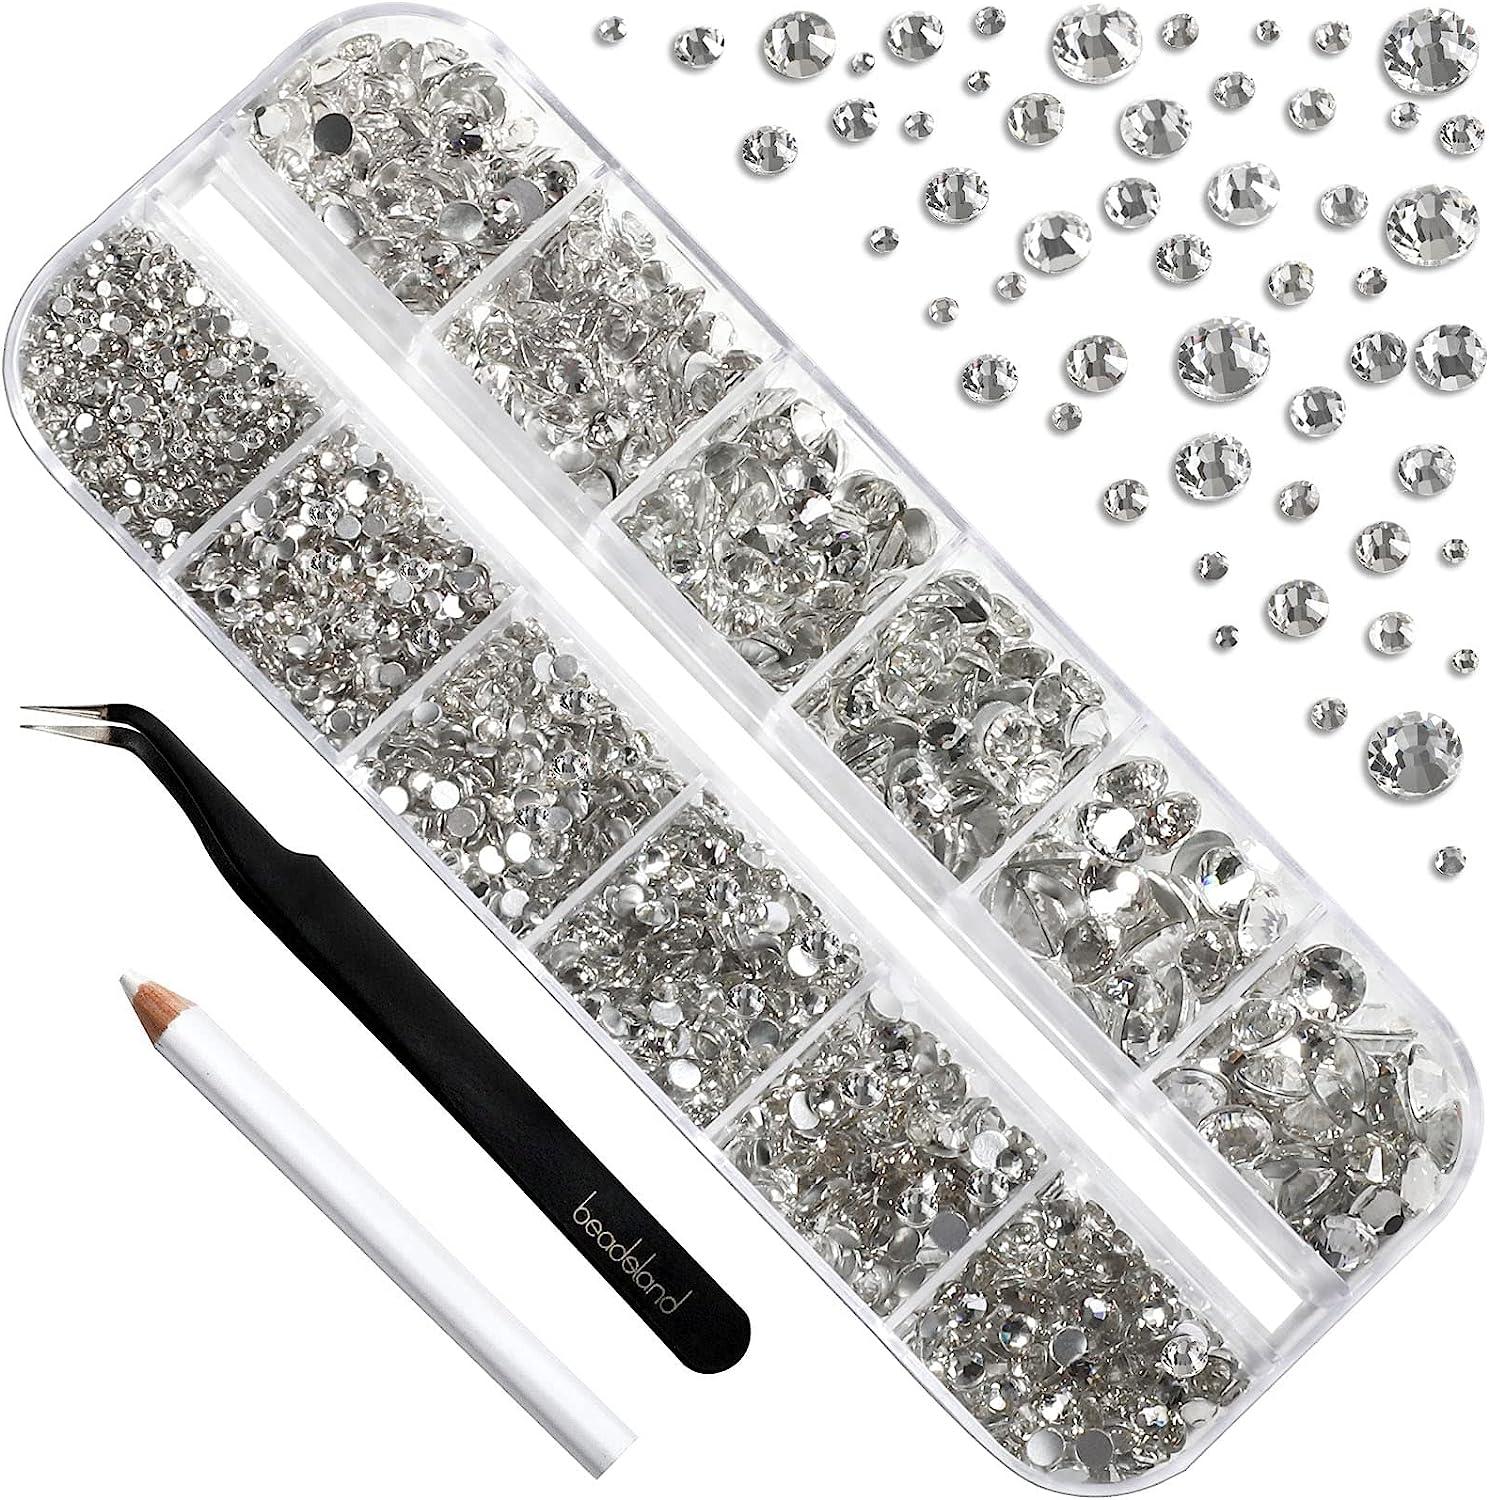 Beadsland Rhinestones for Makeup,8 Sizes 2500pcs Crystal Flatback  Rhinestones Face Gems for Nails Crafts with Tweezers and Wax  Pencil,Clear,SS4-SS30